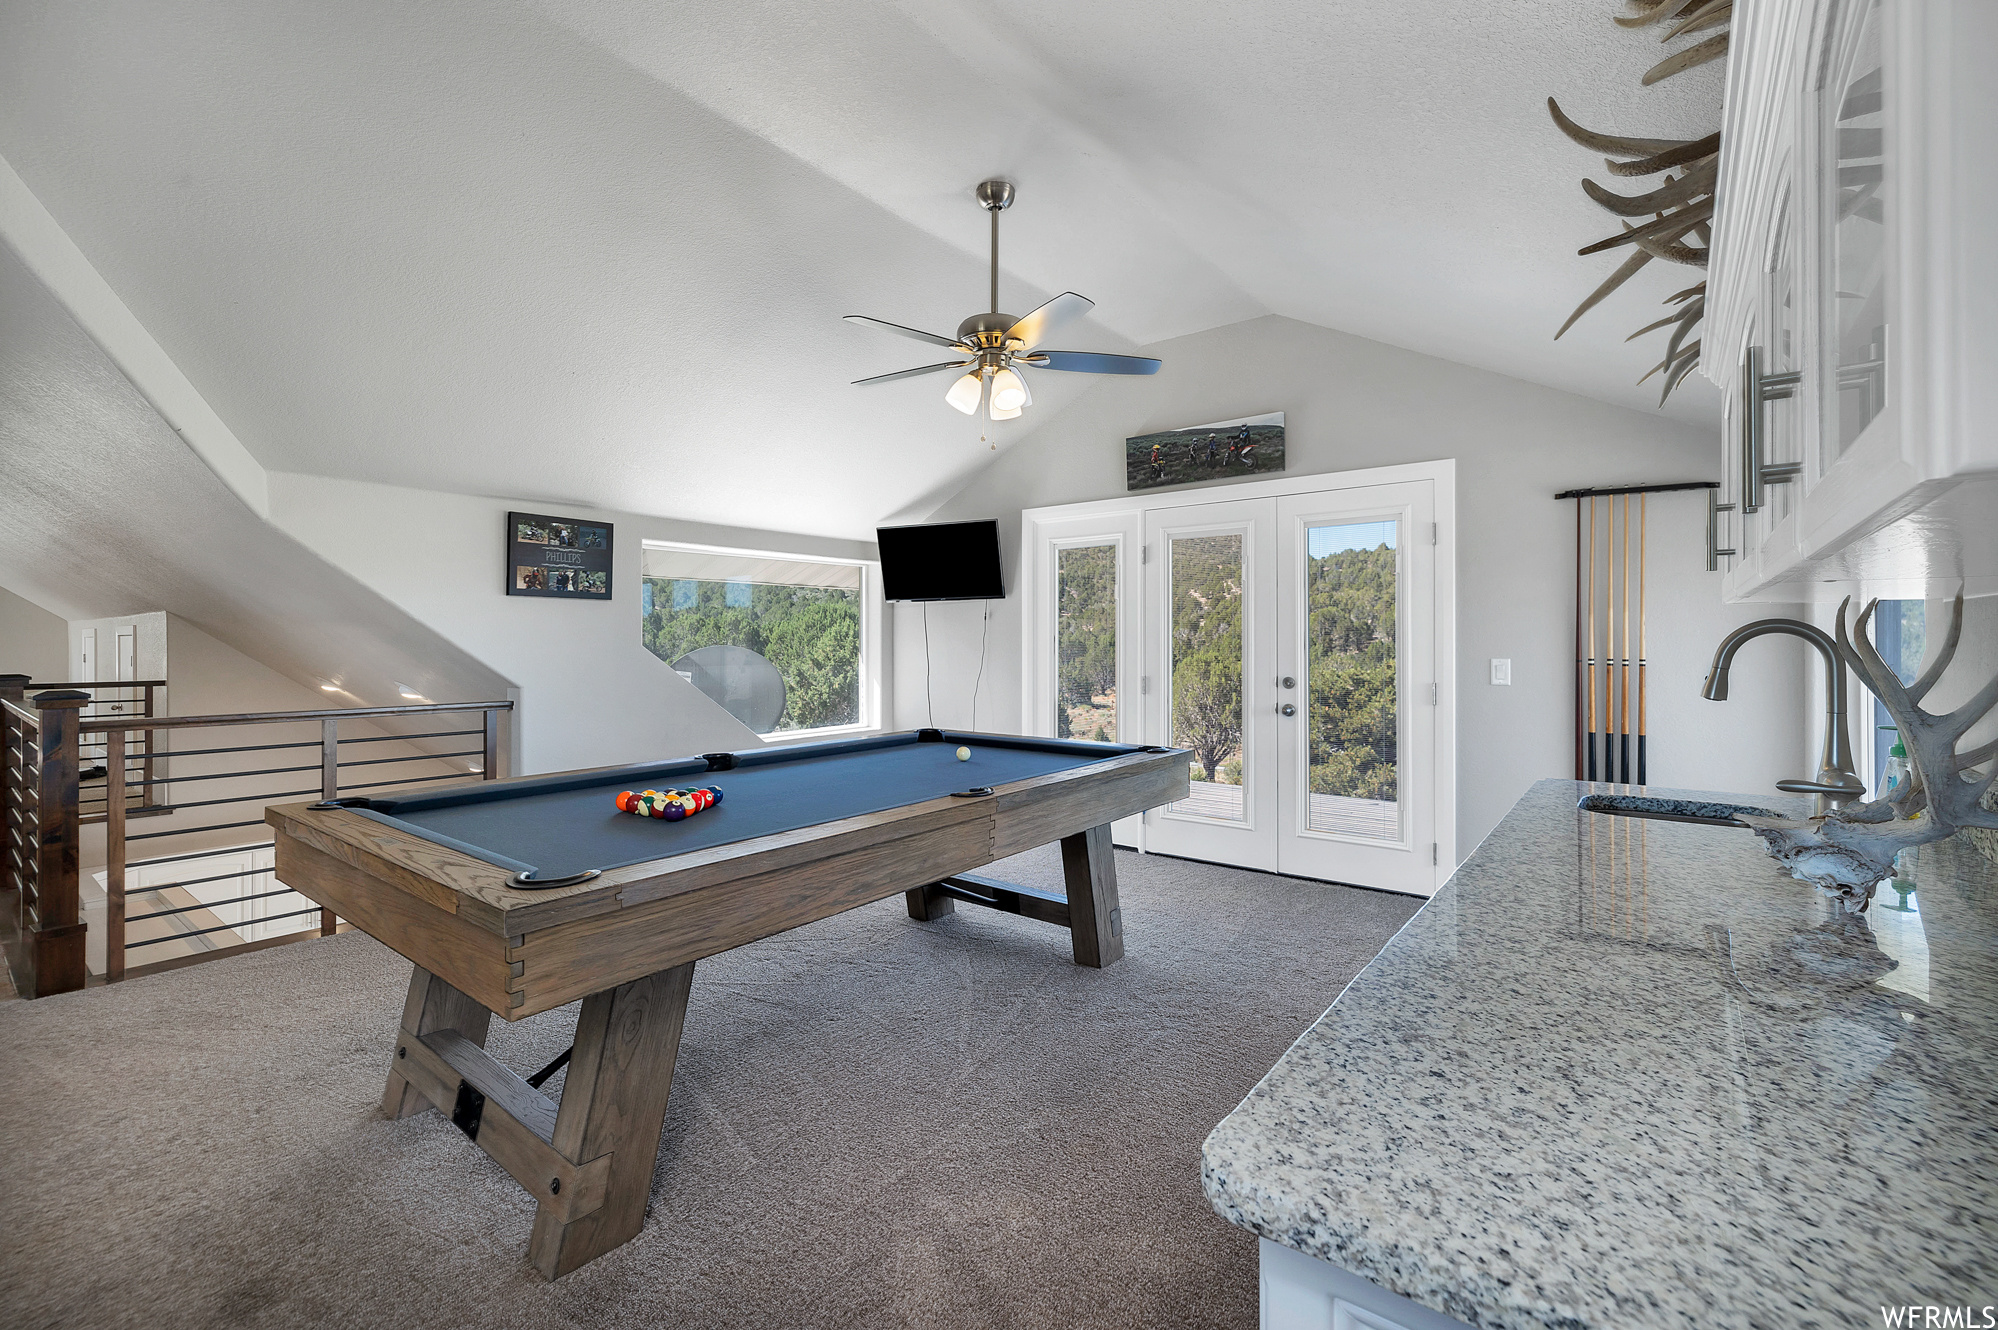 Game room with french doors, natural light, lofted ceiling, carpet